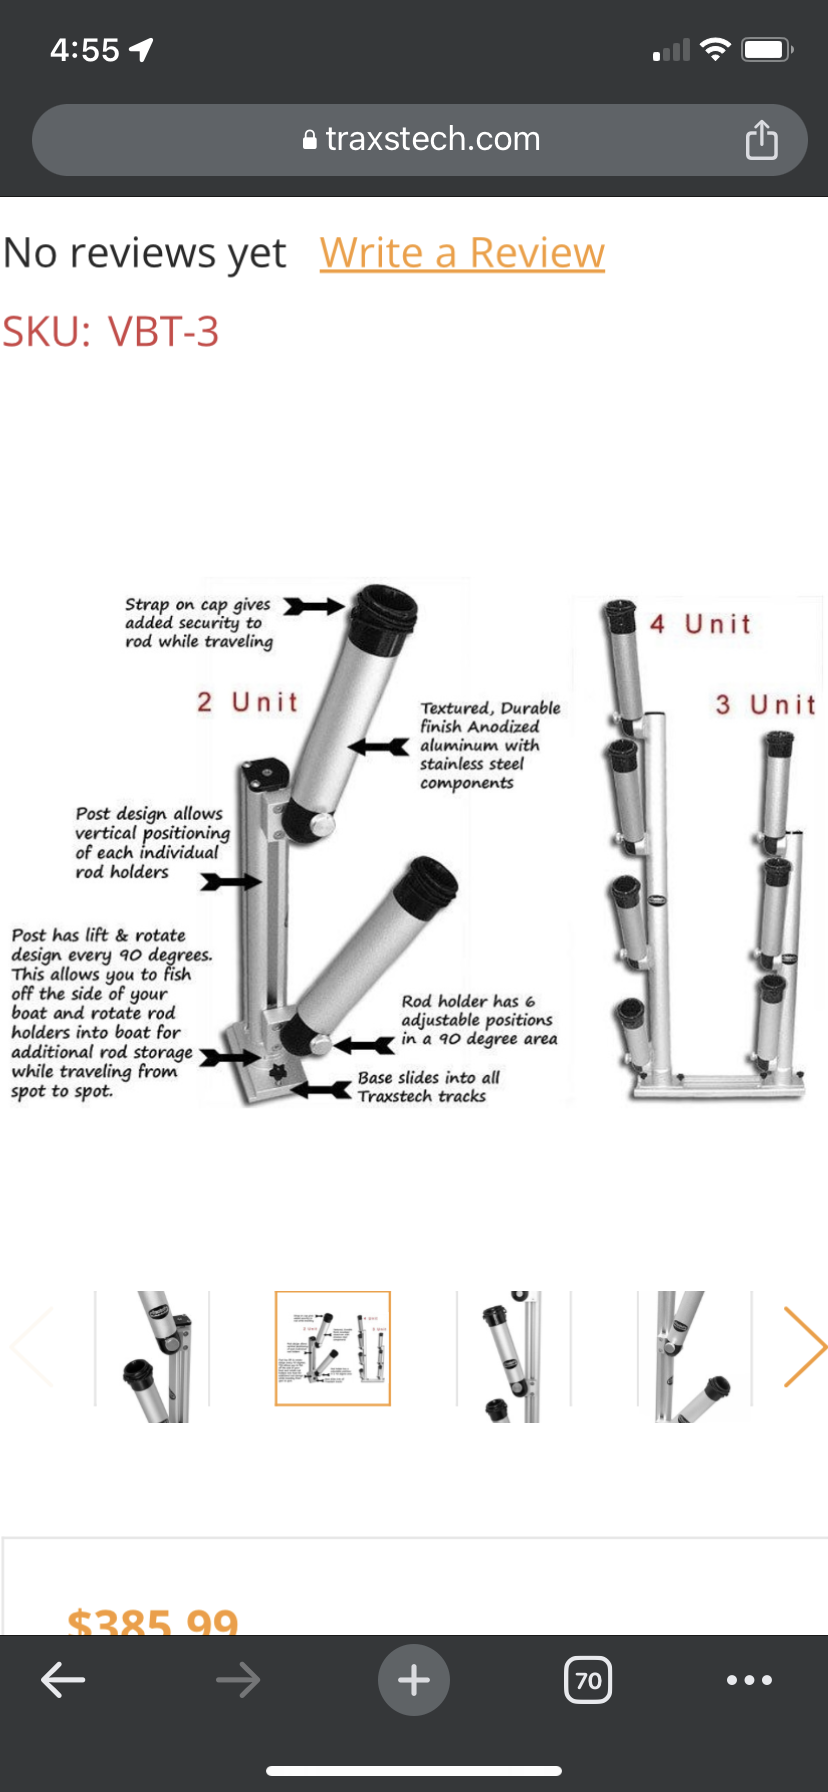 Walleye Boat Rod Holder Selection, Placement and Tips - Cannon 